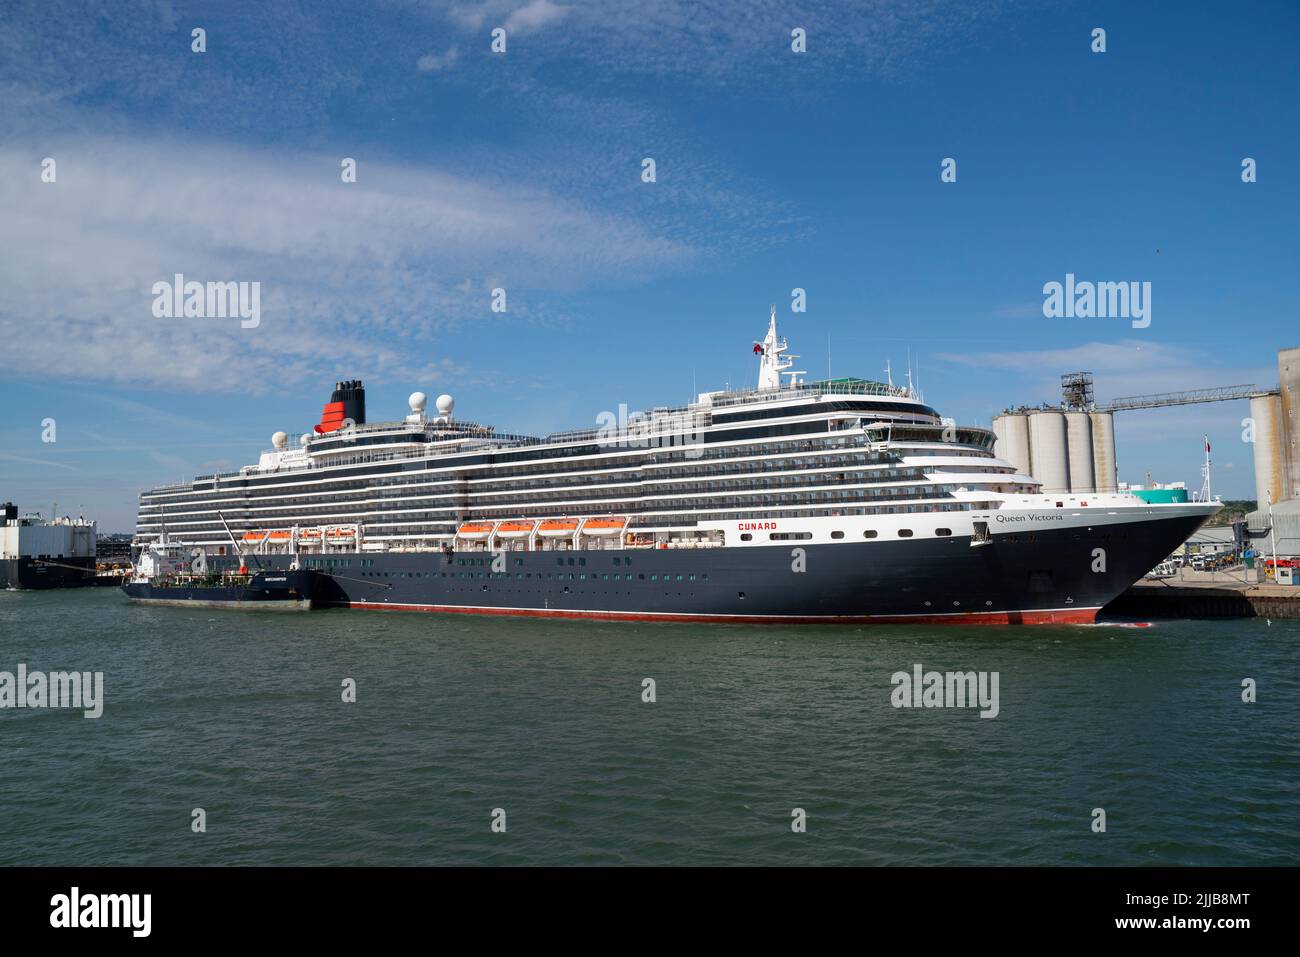 The MS Queen Victoria, a Vista-class cruise ship operated by Cunard, docked in Southampton Docks harbourside. Stock Photo